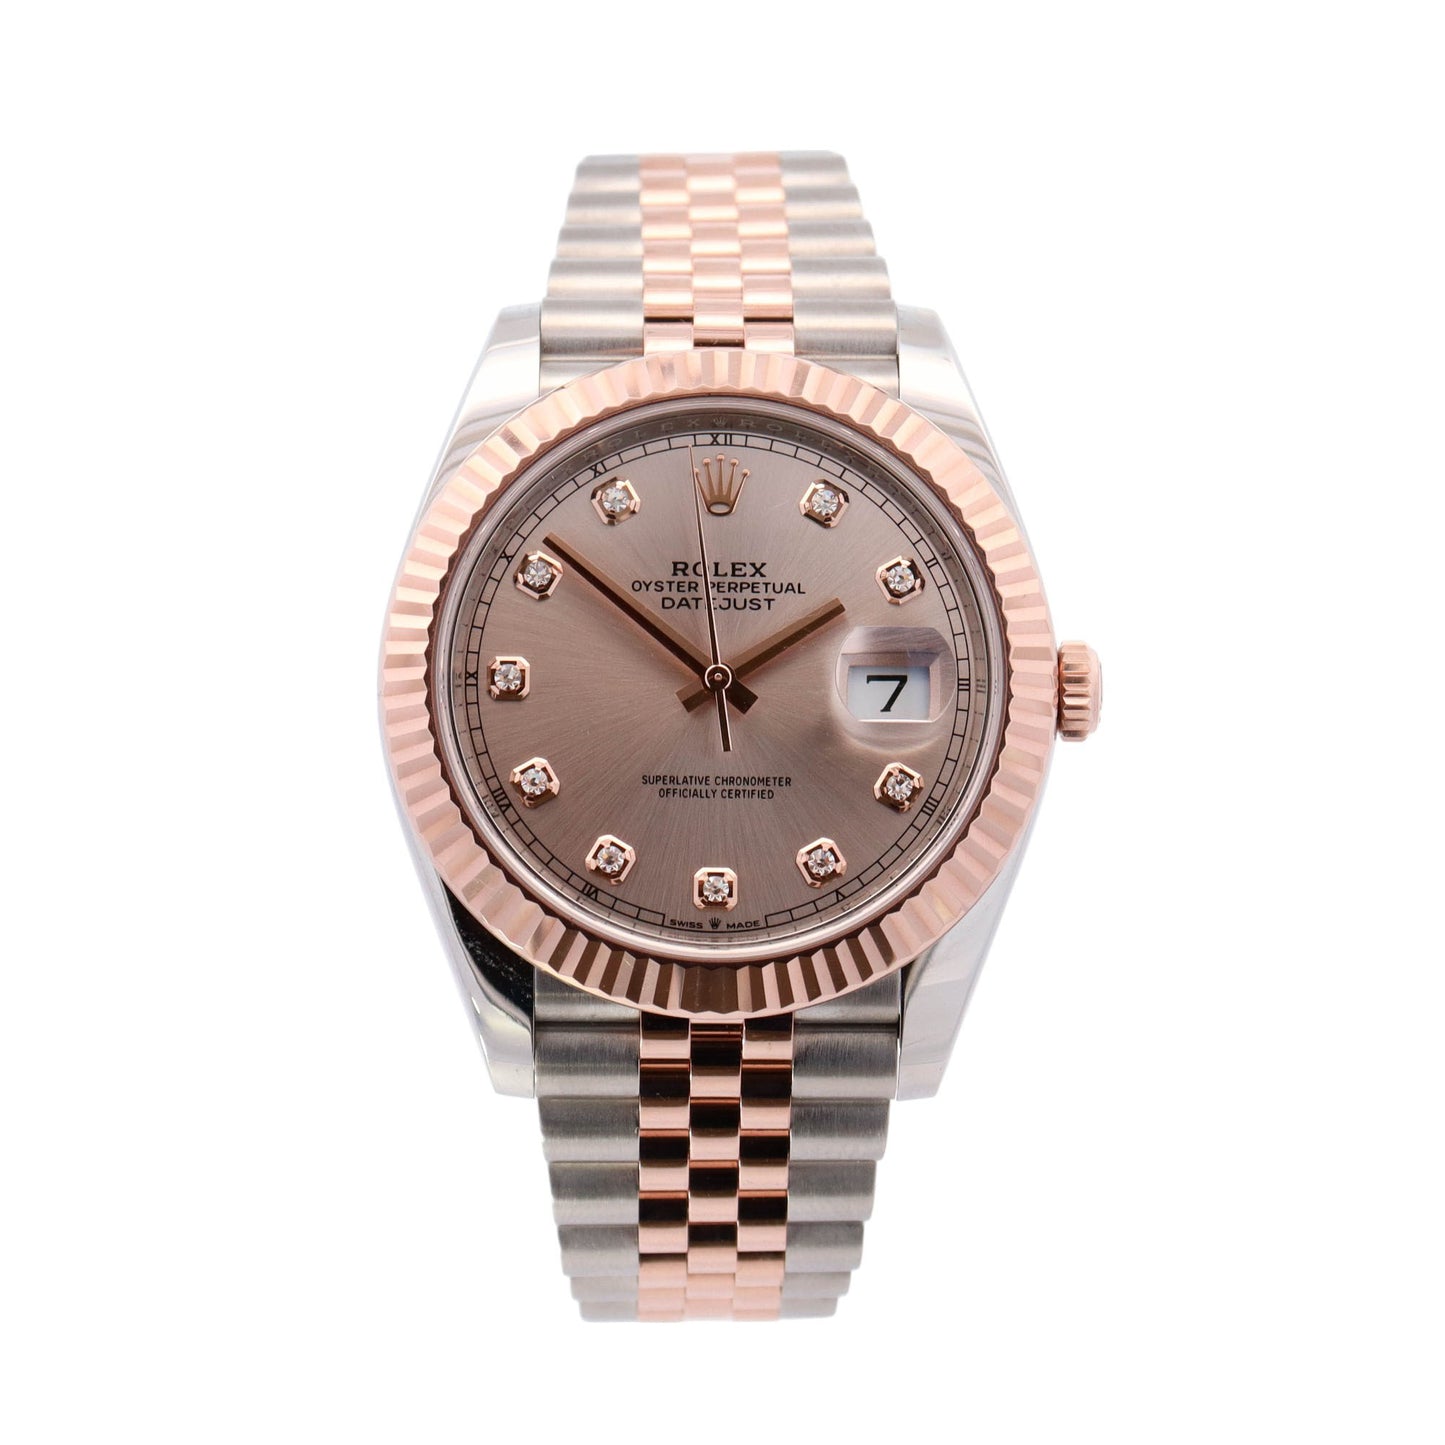 Rolex Datejust Rose Gold and Stainless Steel 41mm Sun Diamond Dial Watch Reference# 126331 - Happy Jewelers Fine Jewelry Lifetime Warranty